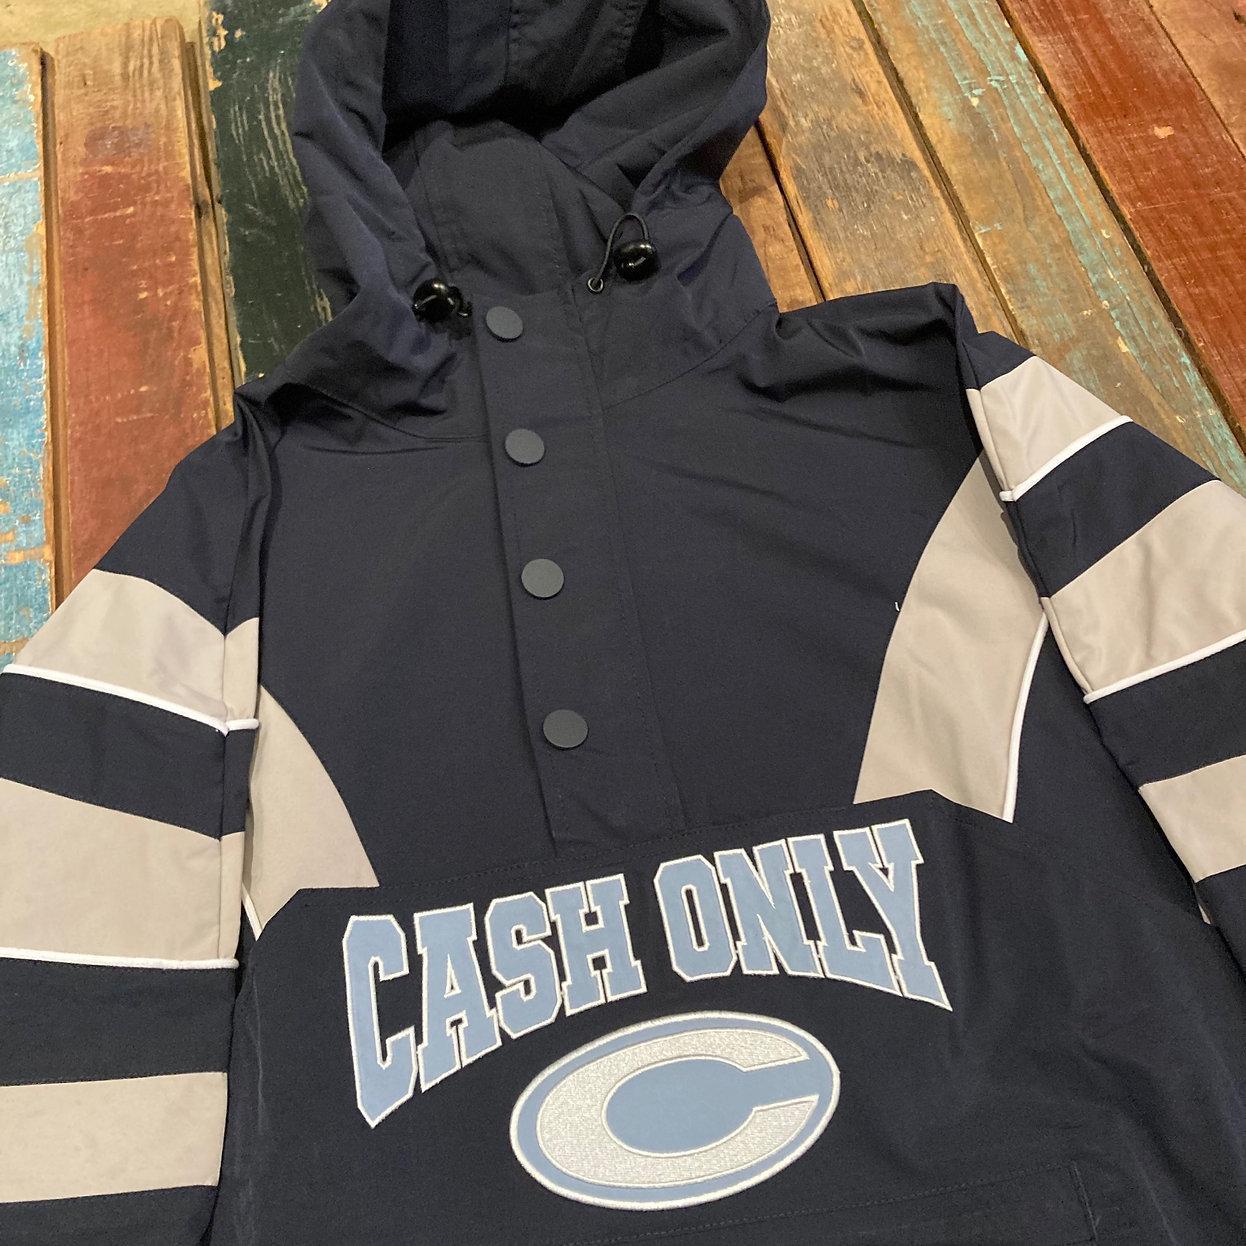 Cash Only League Anorak Jacket Navy